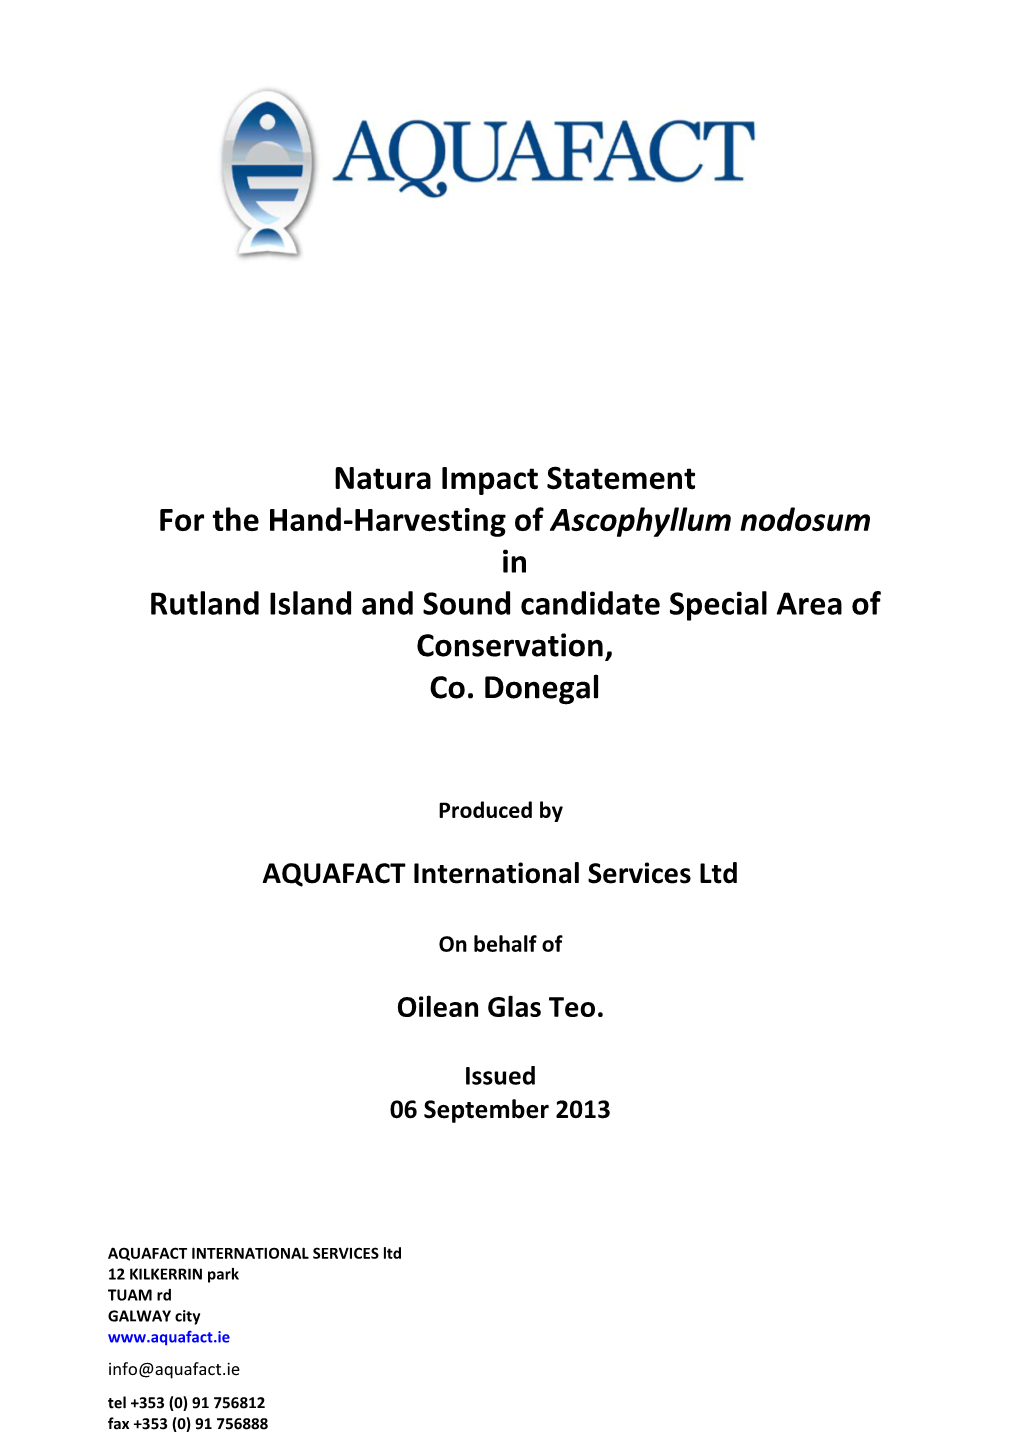 Natura Impact Statement for the Hand-Harvesting of Ascophyllum Nodosum in Rutland Island and Sound Candidate Special Area of Conservation, Co